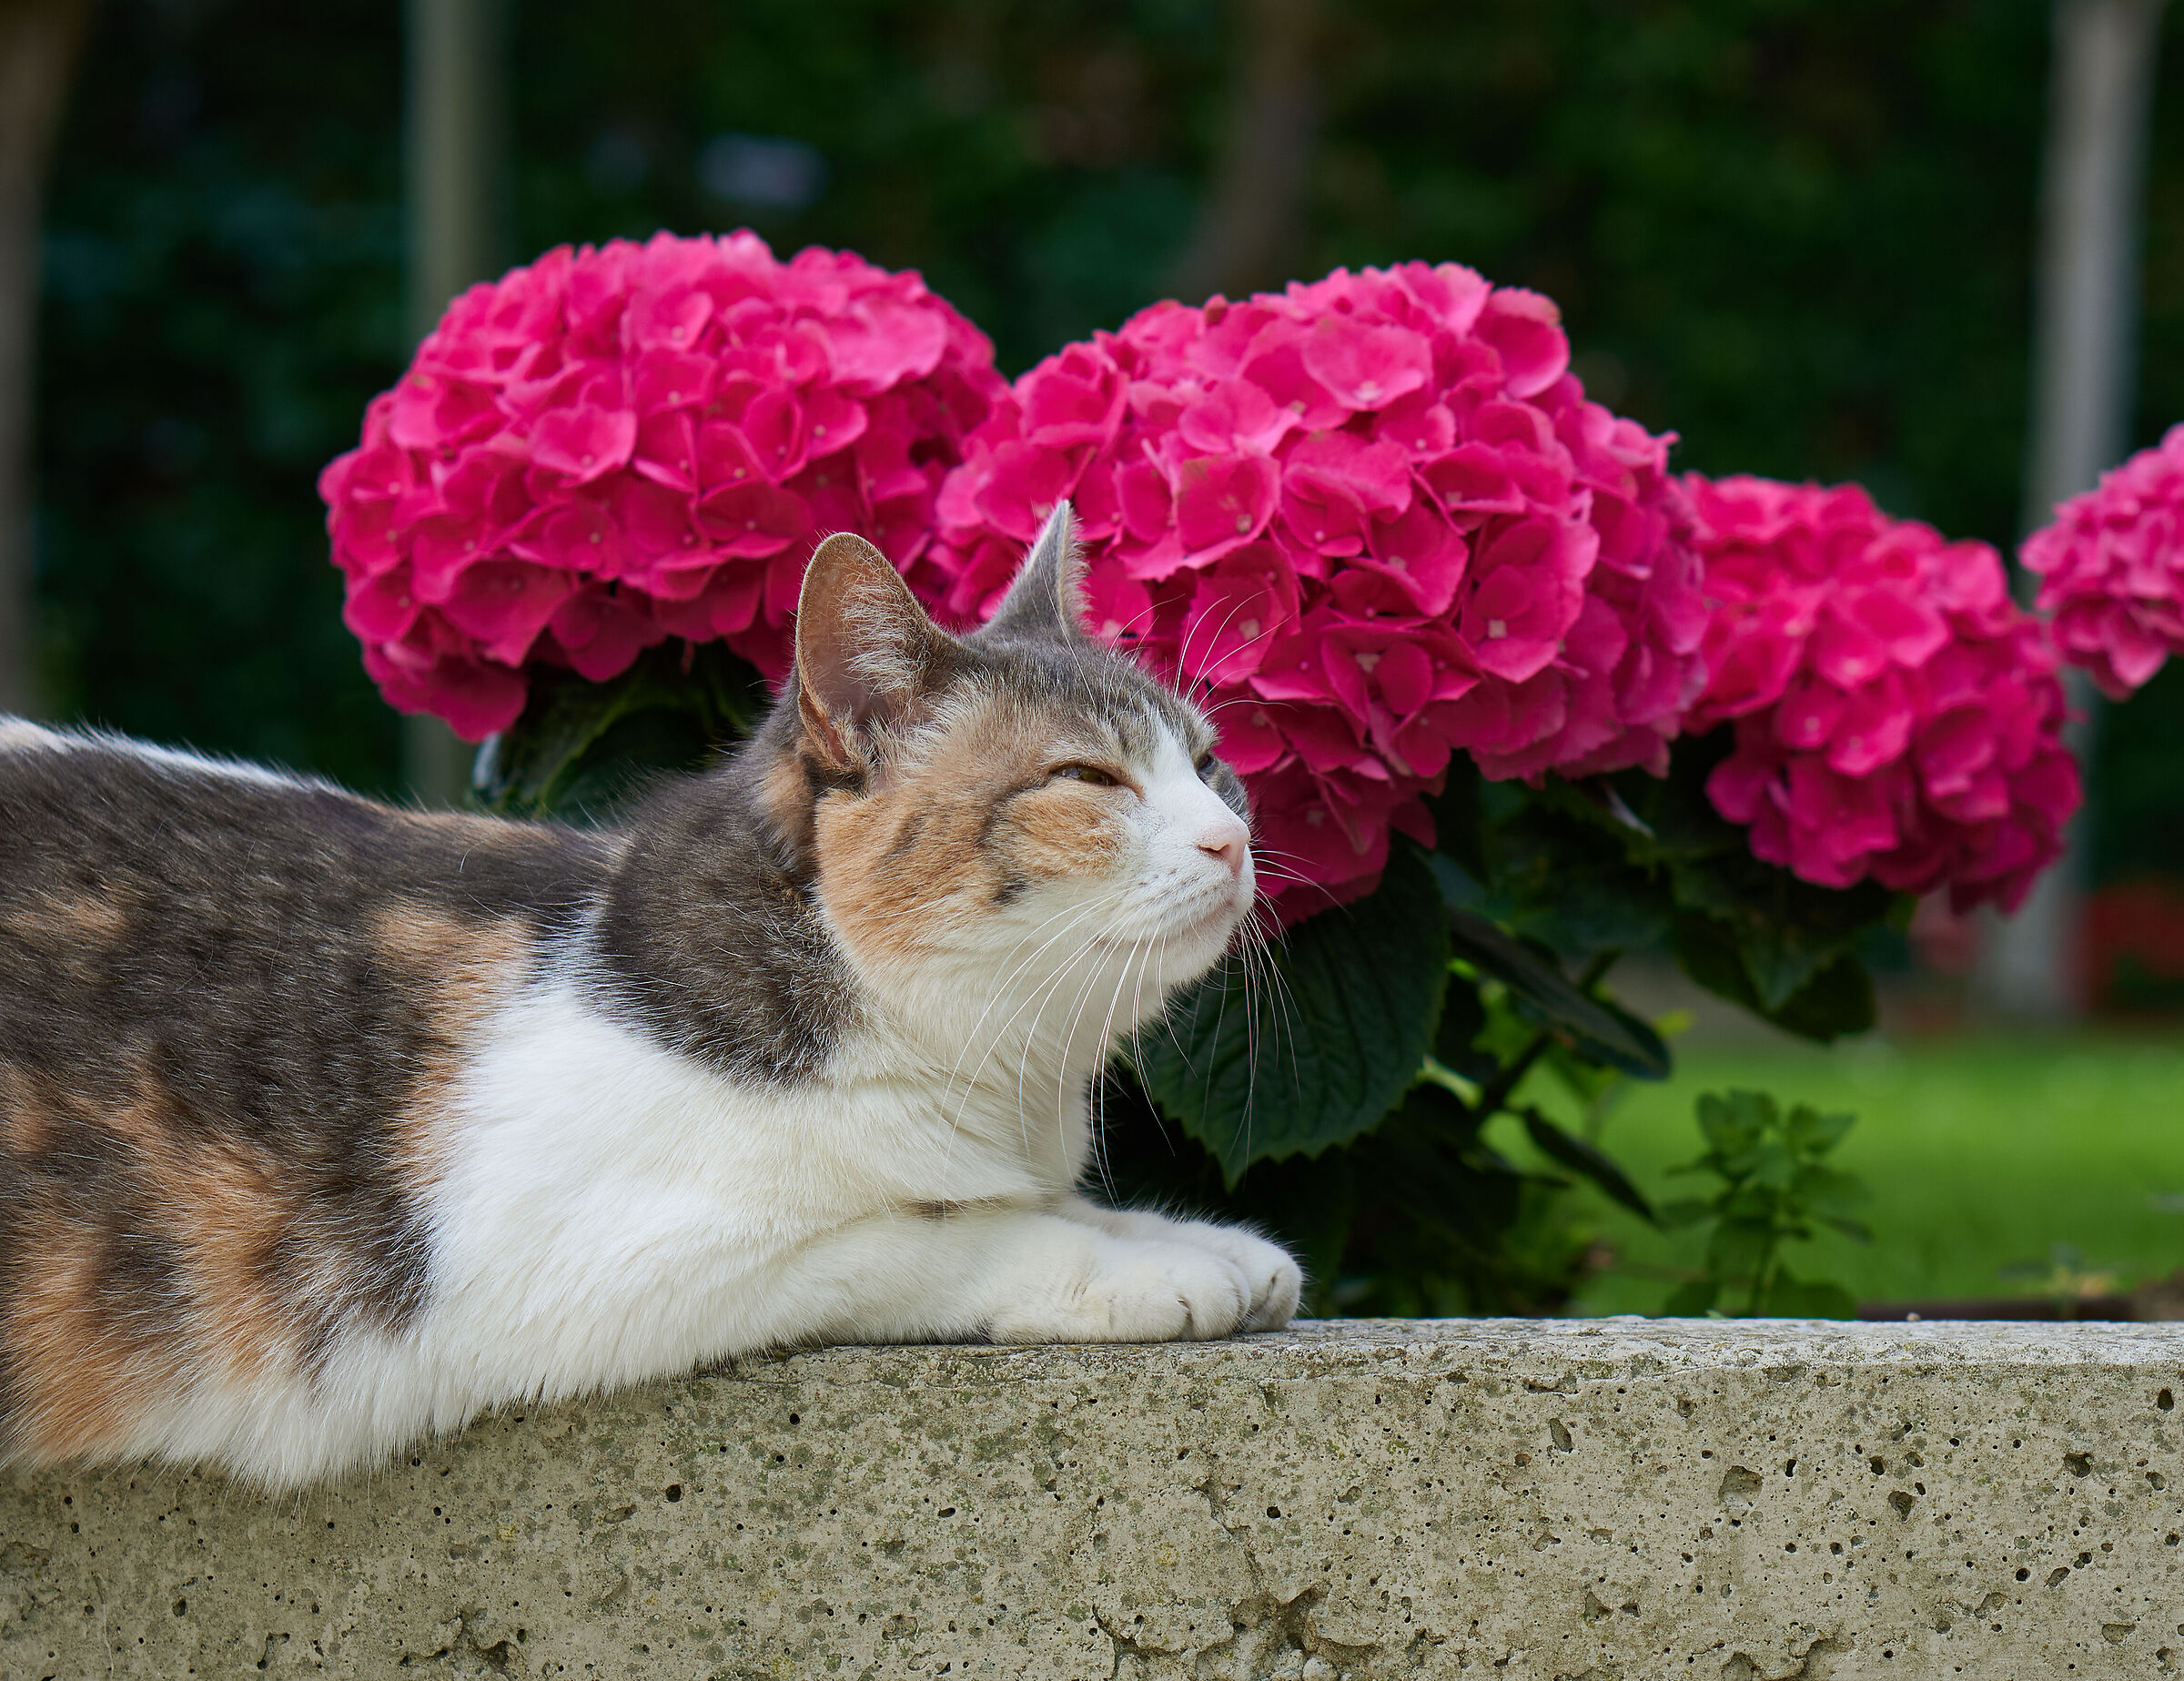 My cat and the hort gardens...